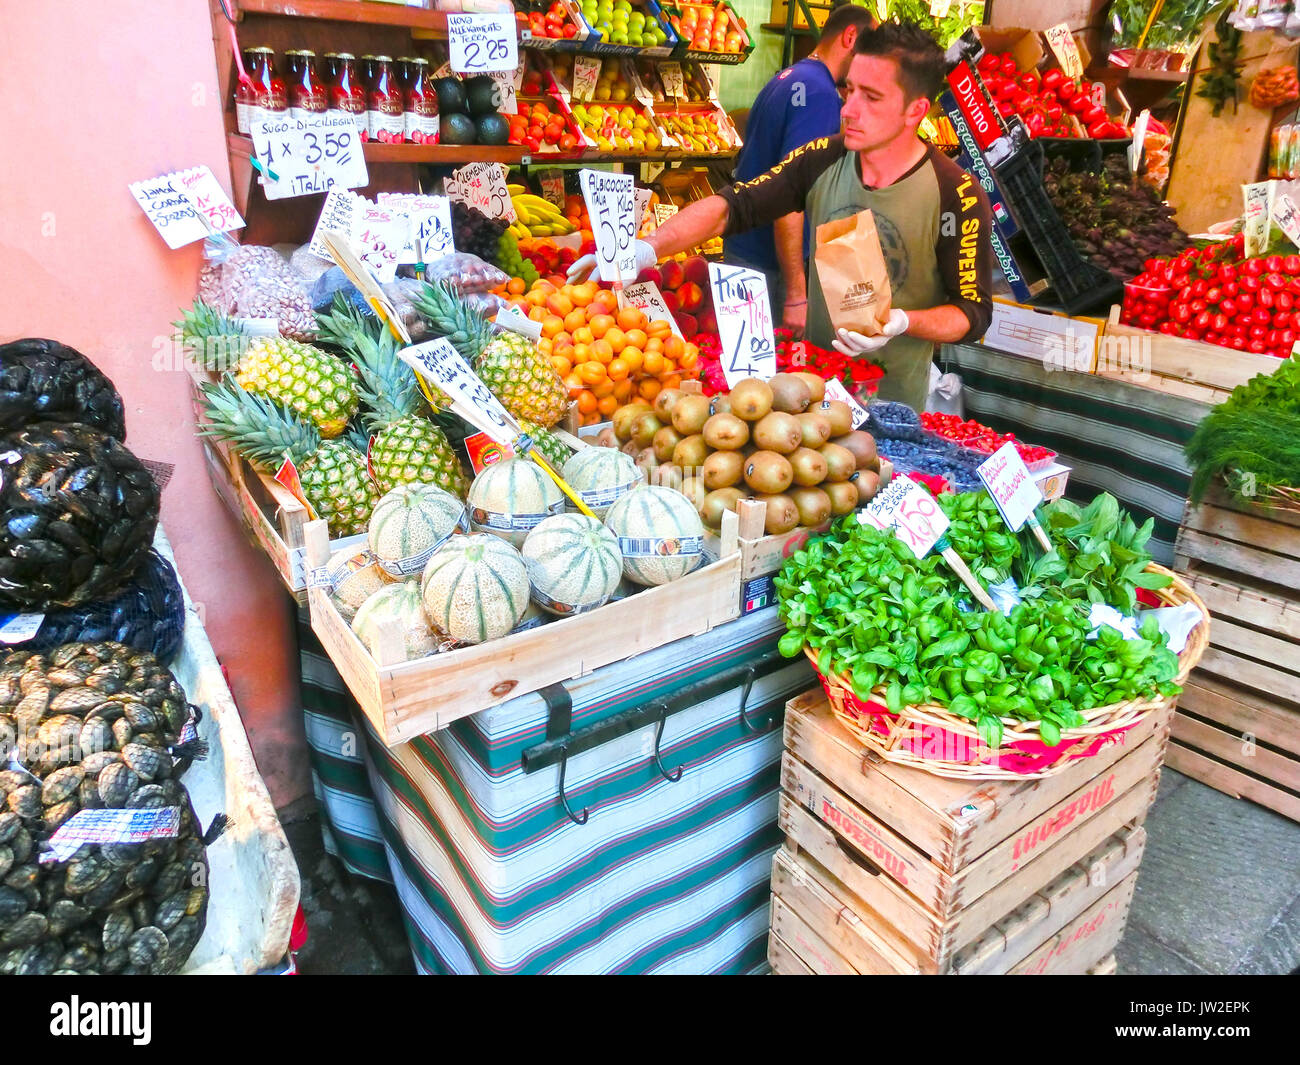 Venice, Italy - May 10, 2014: People near a counter with vegetables on market Stock Photo